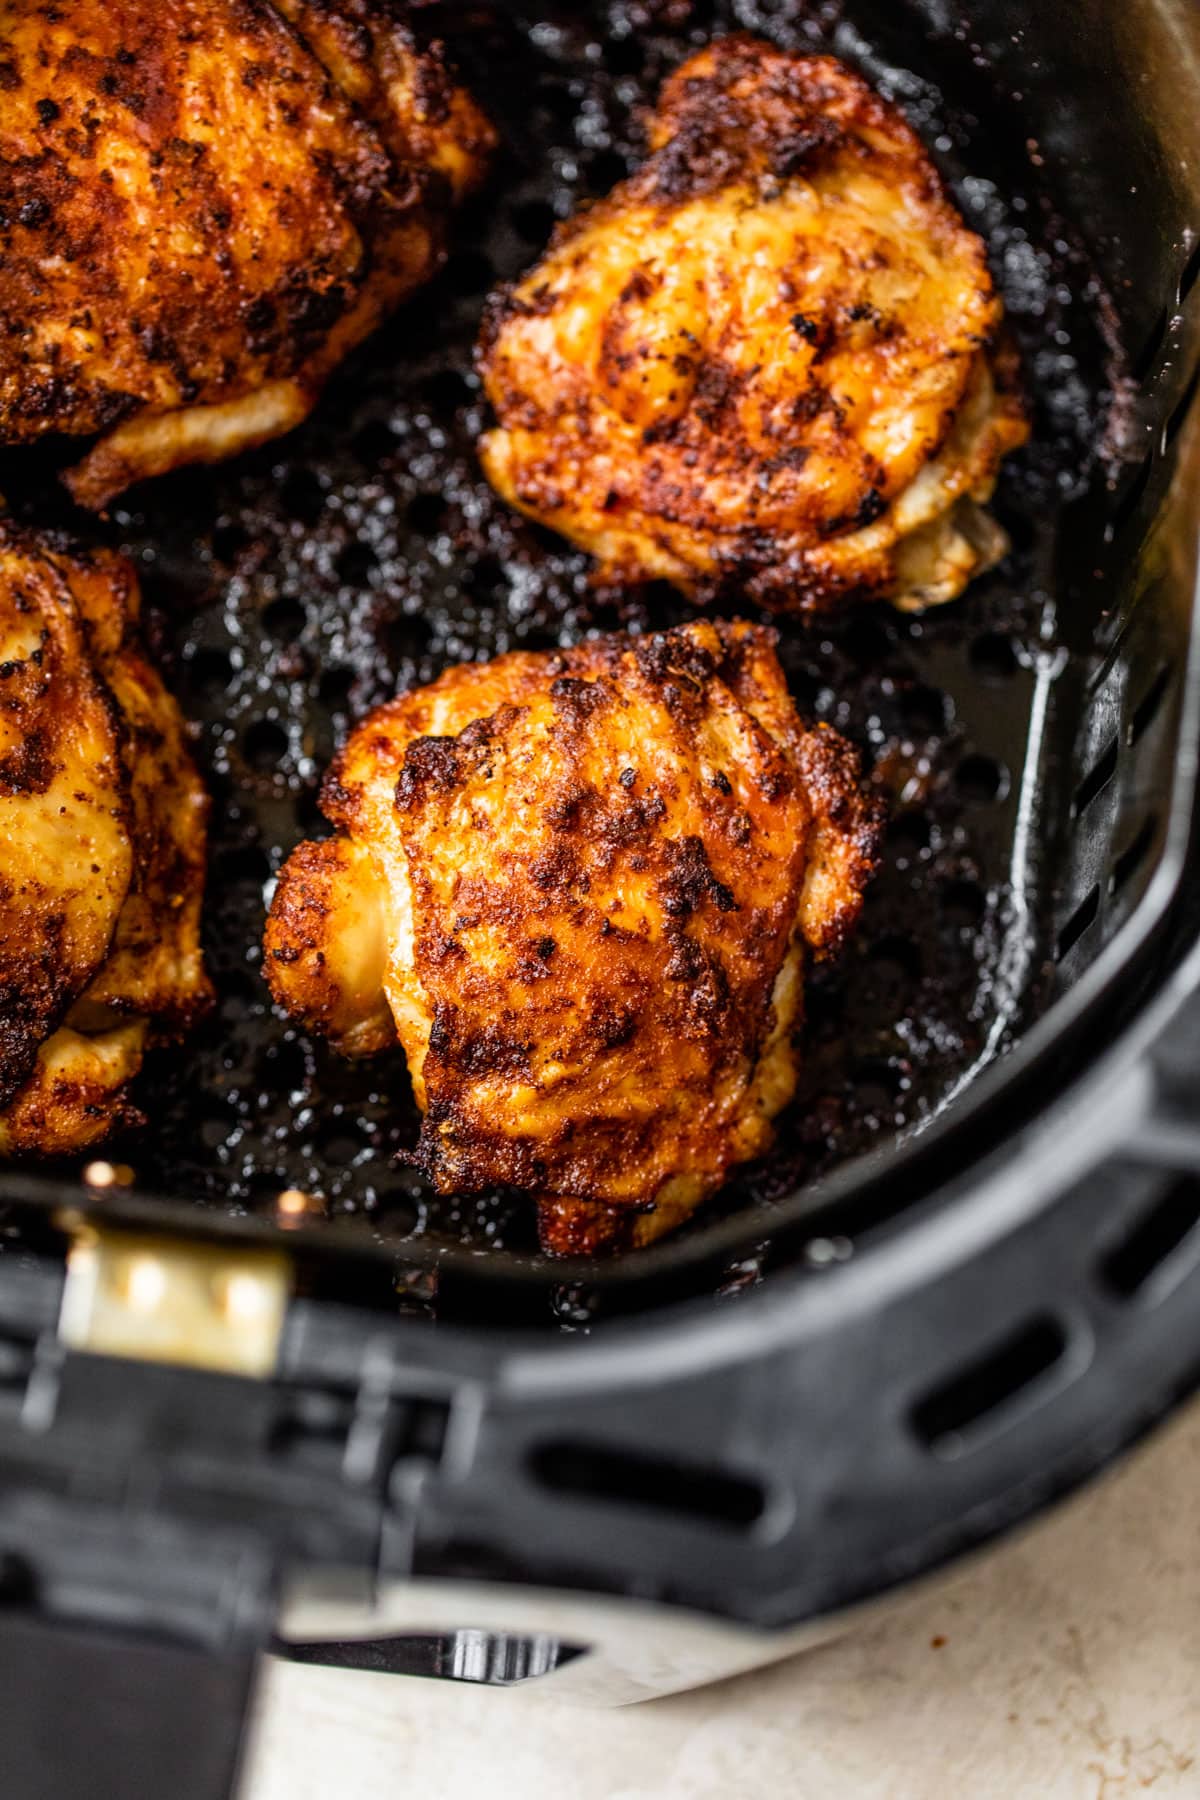 An air fryer with chicken thighs inside